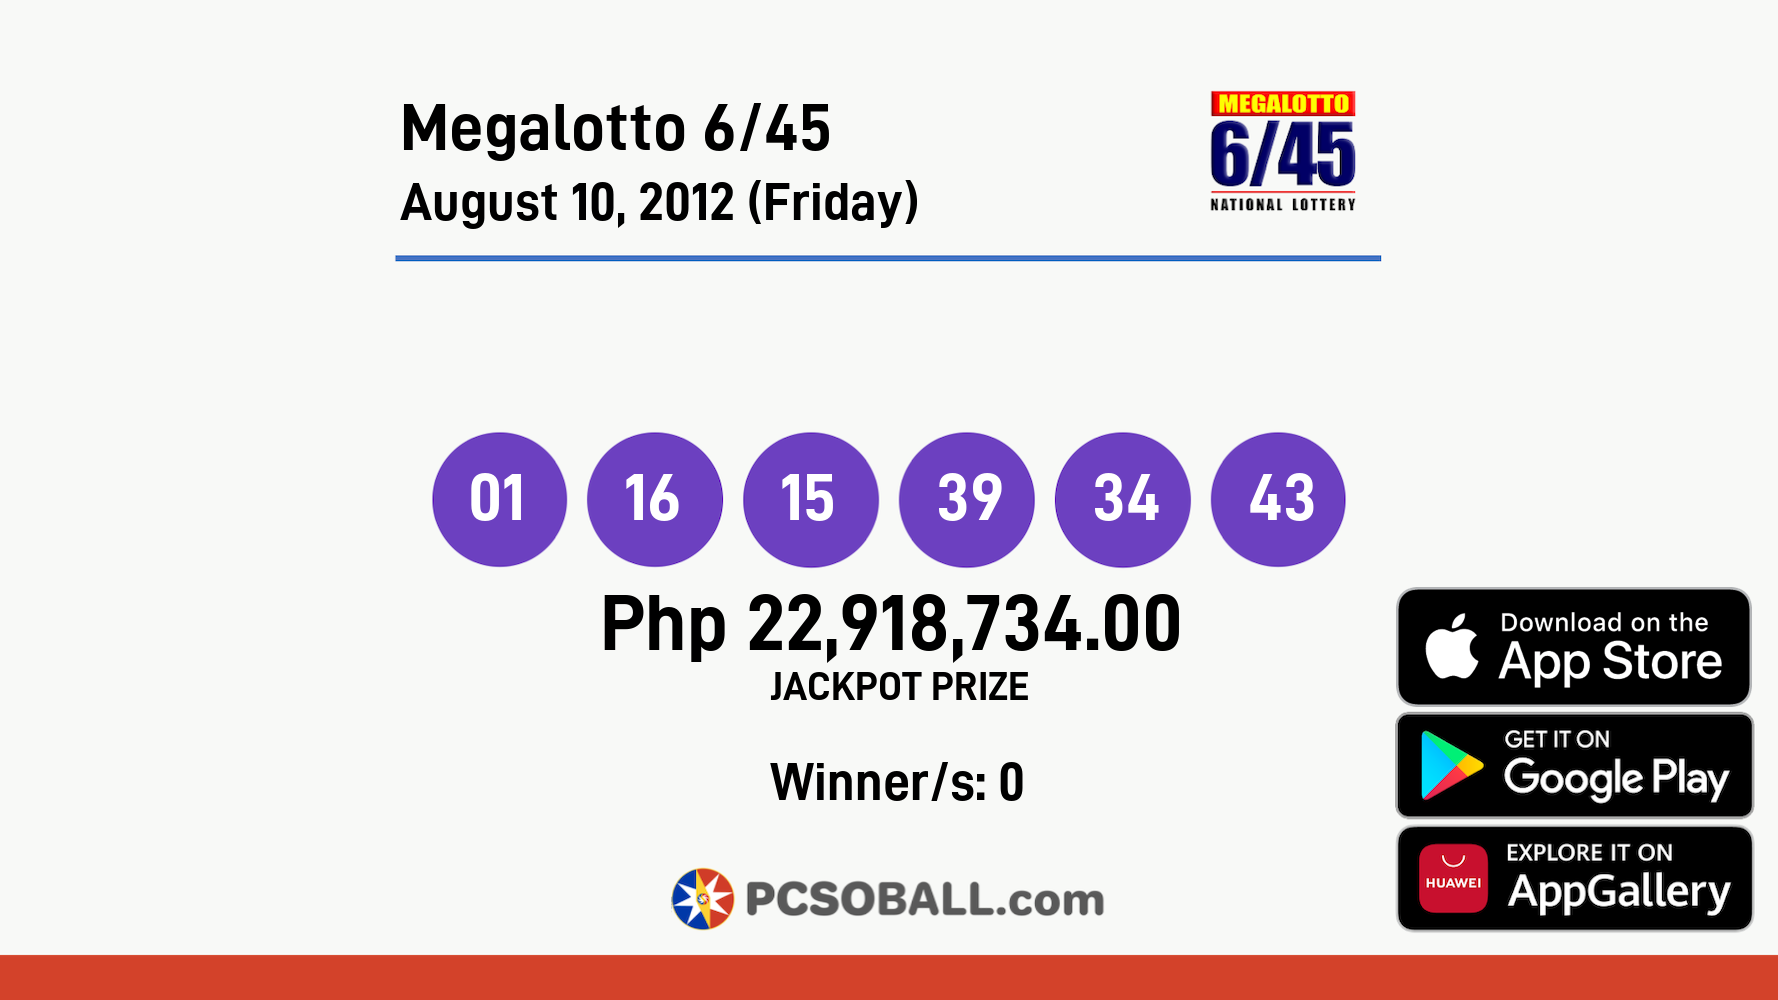 Megalotto 6/45 August 10, 2012 (Friday) Result